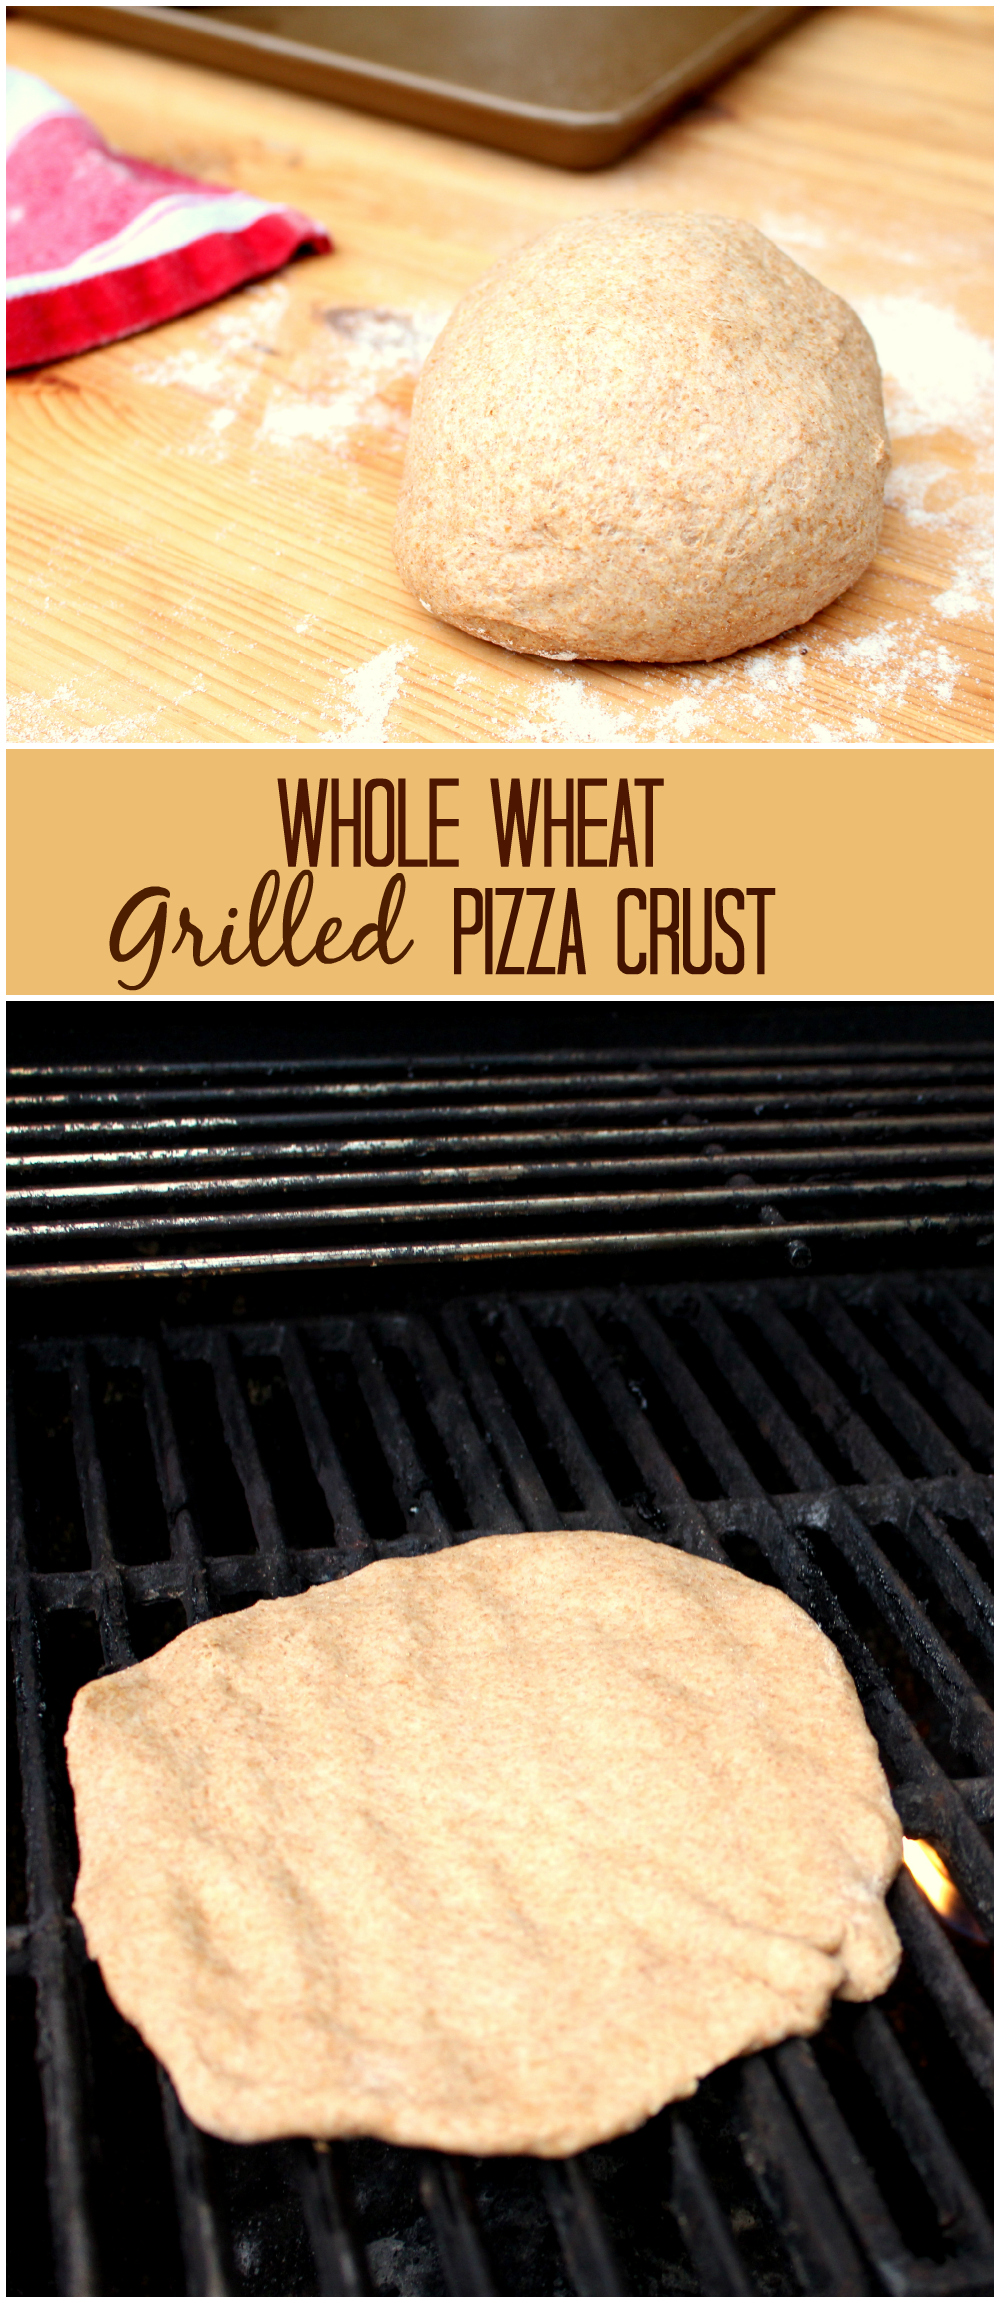 Whole Wheat Grilled Pizza Crust. Pizza on the grill is surprisingly easy and delicious. This whole wheat pizza crust is not only healthy, but quick to make and can be ready in less than 45 minutes.